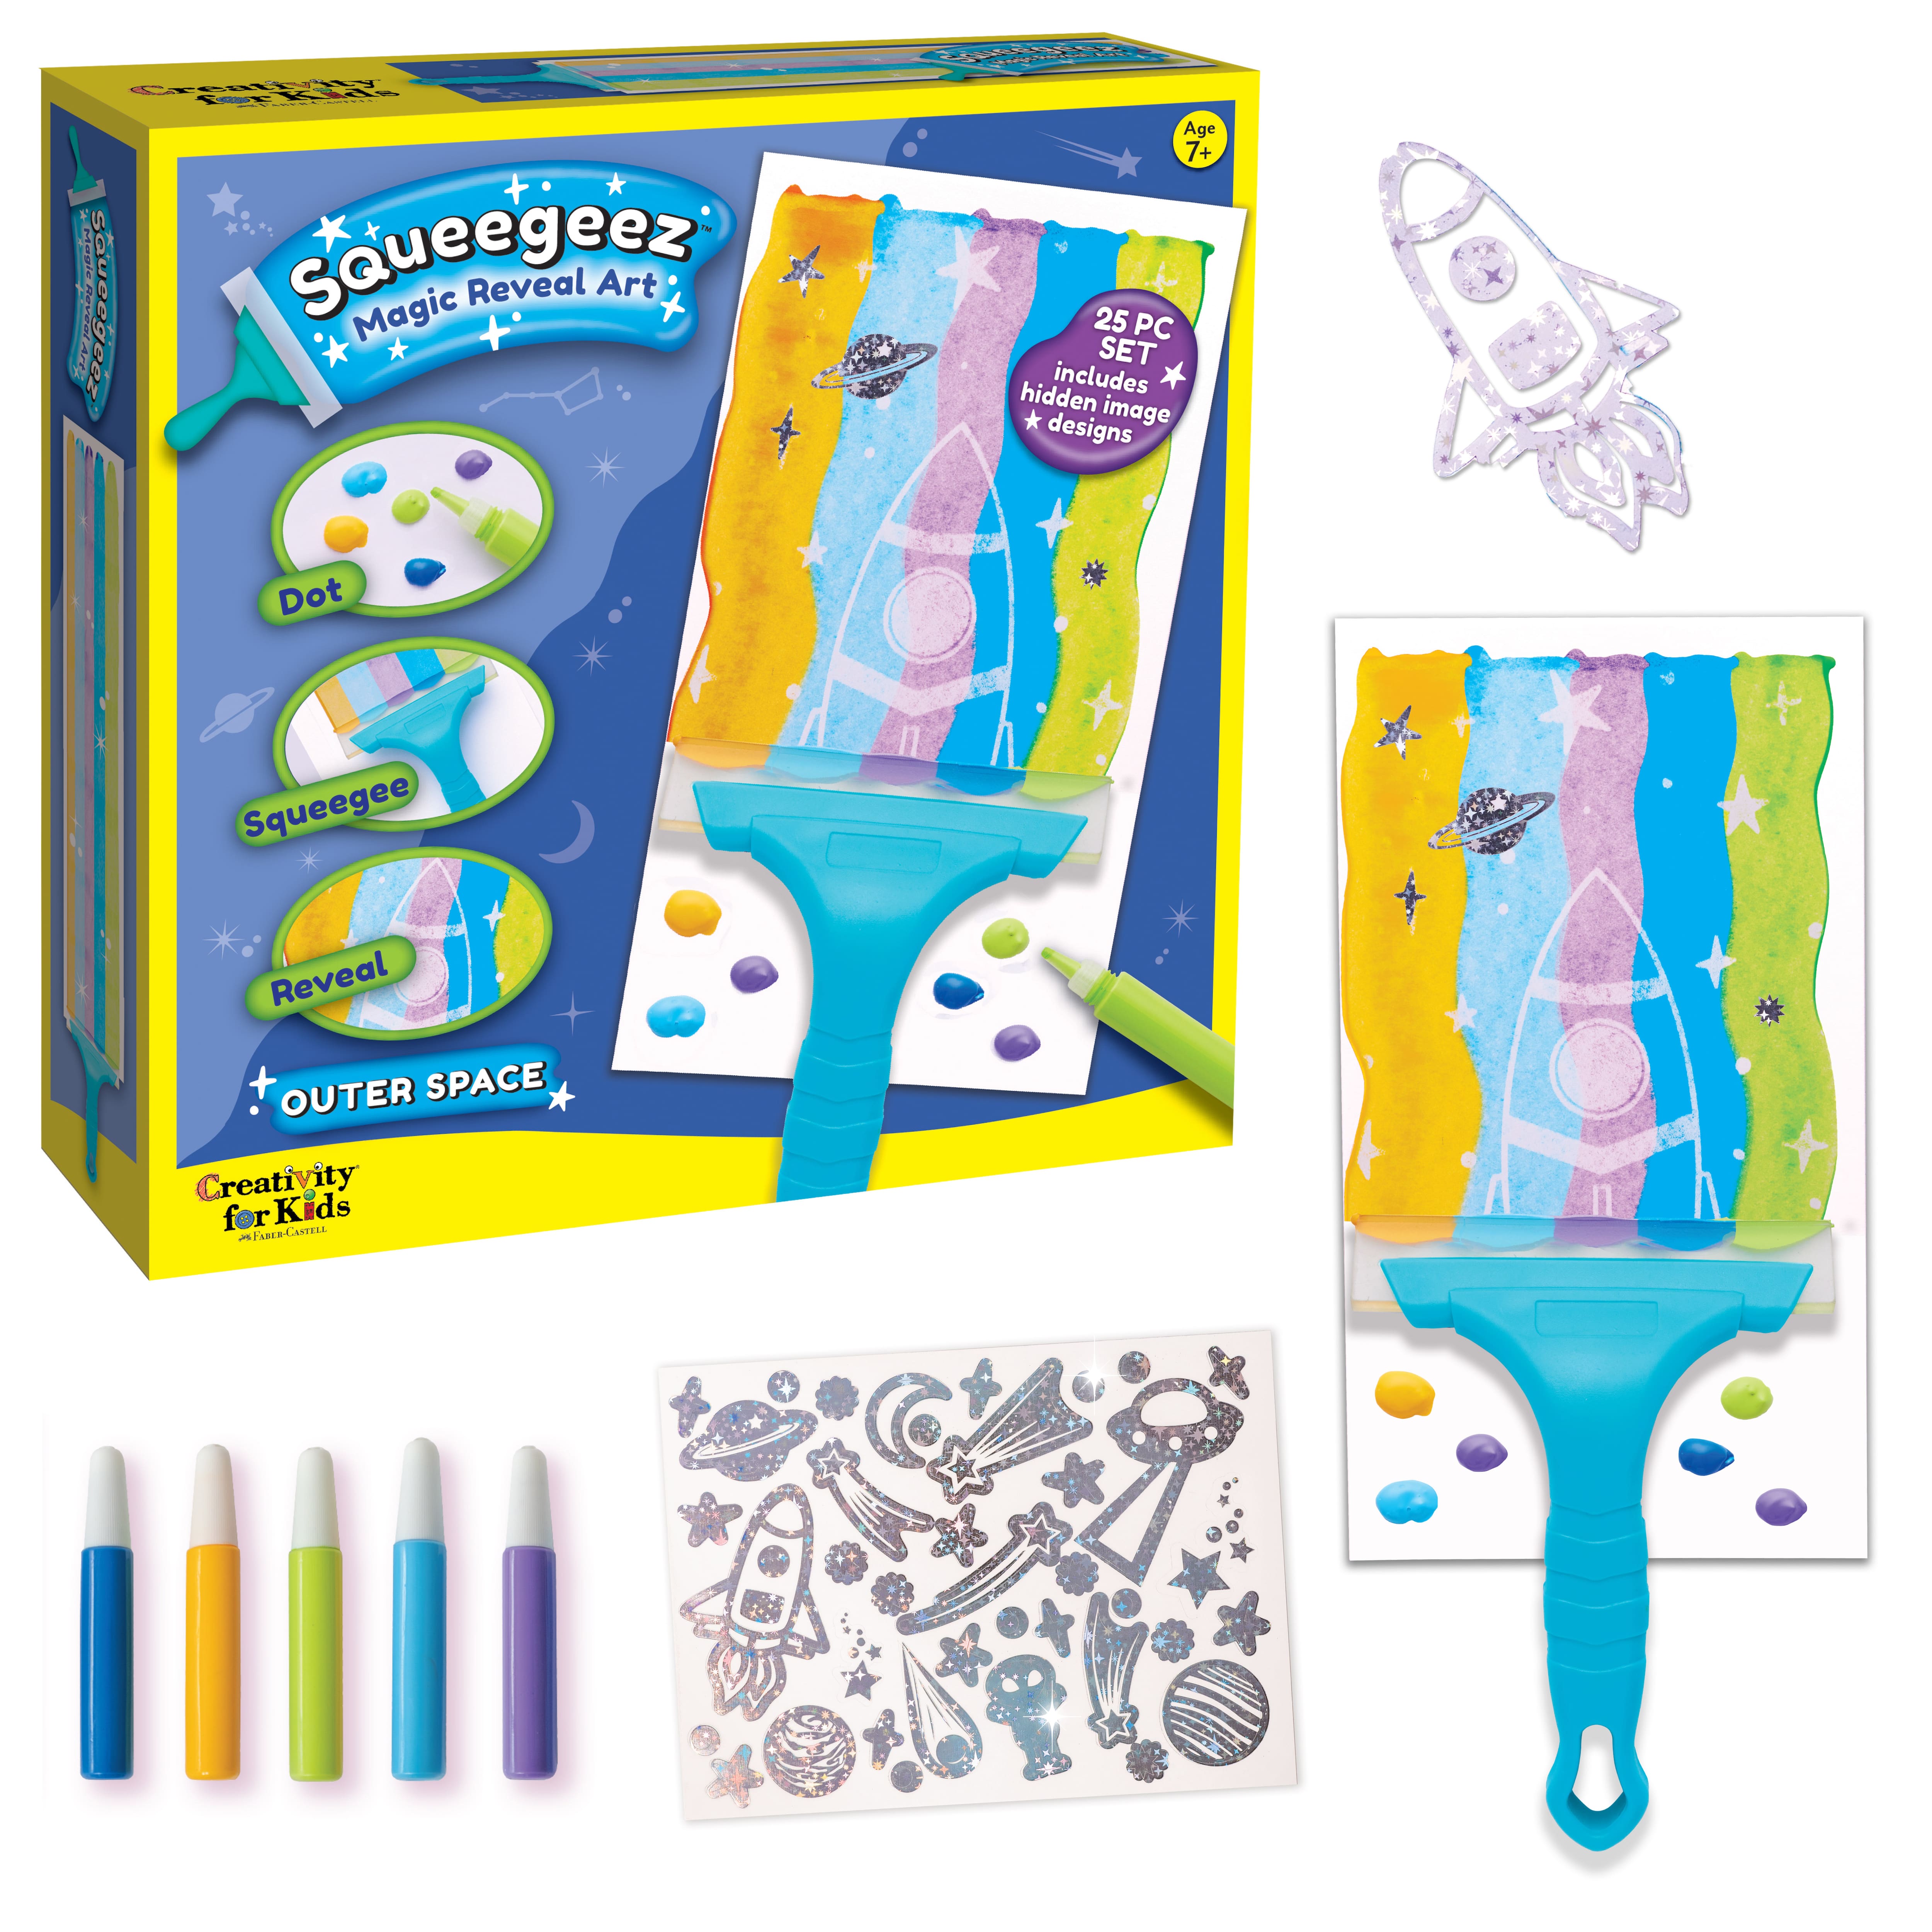 Creativity for Kids&#xAE; Outer Space Squeegeez Magic Reveal Art